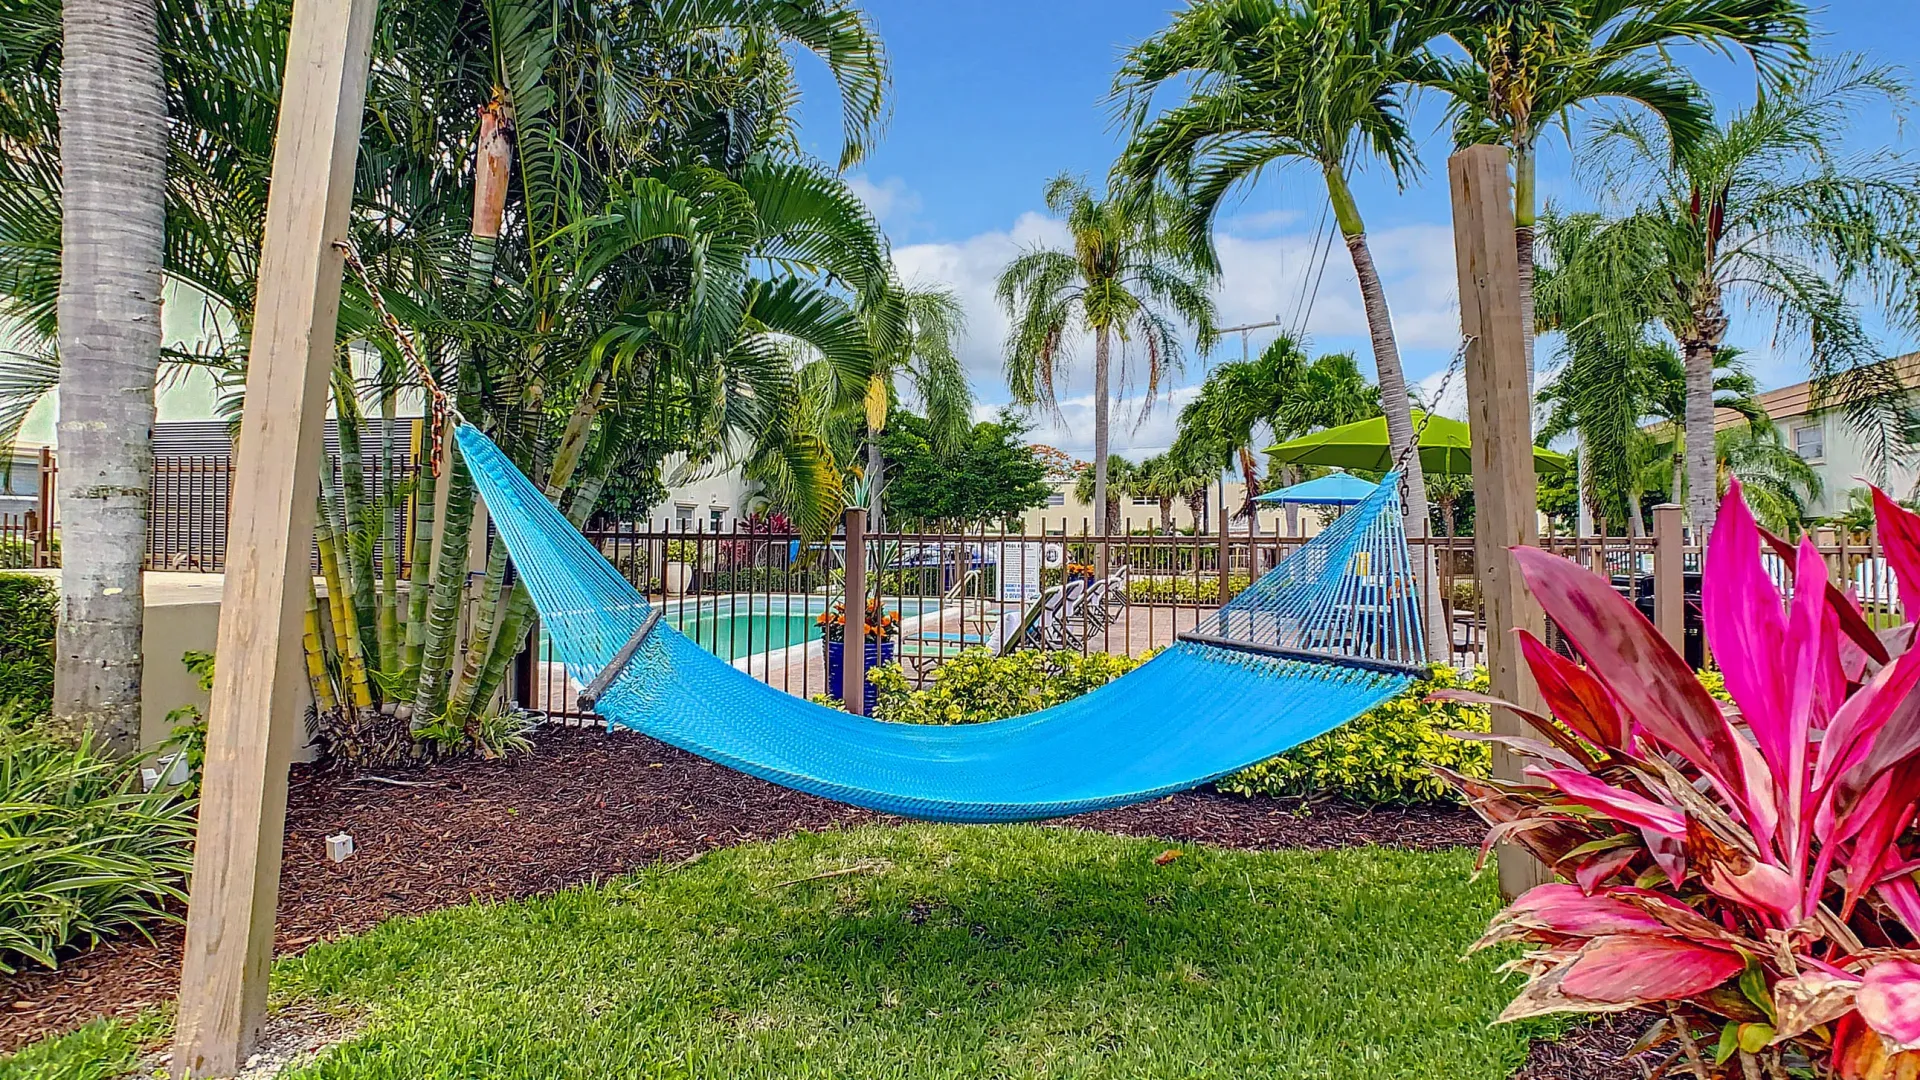 A hammock garden beneath palm trees just outside the gated pool area inviting residents to relax and rejuvenate in the serene abode. 